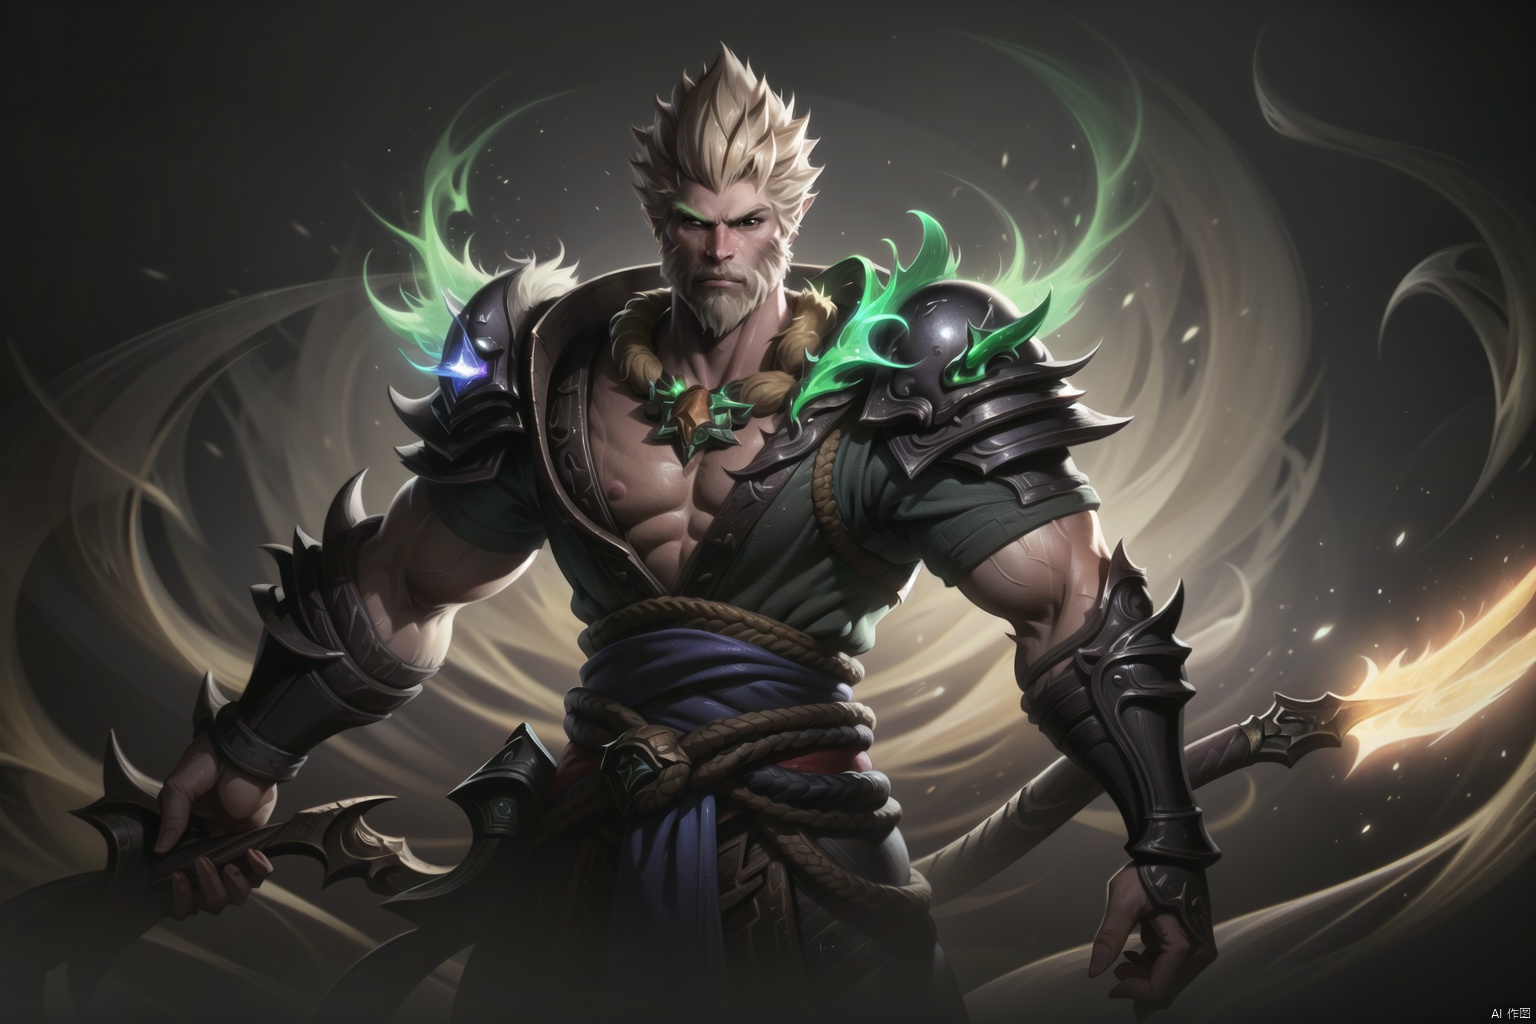  The heroic character in "League of Legends", he wears warrior armor, exudes a green aura, and holds a big knife in his hand. A close-up of a character, this painting adopts the fantasy art style of "League of Legends" illustrations. --ar 128:85, Darius, songoku,black monkey king